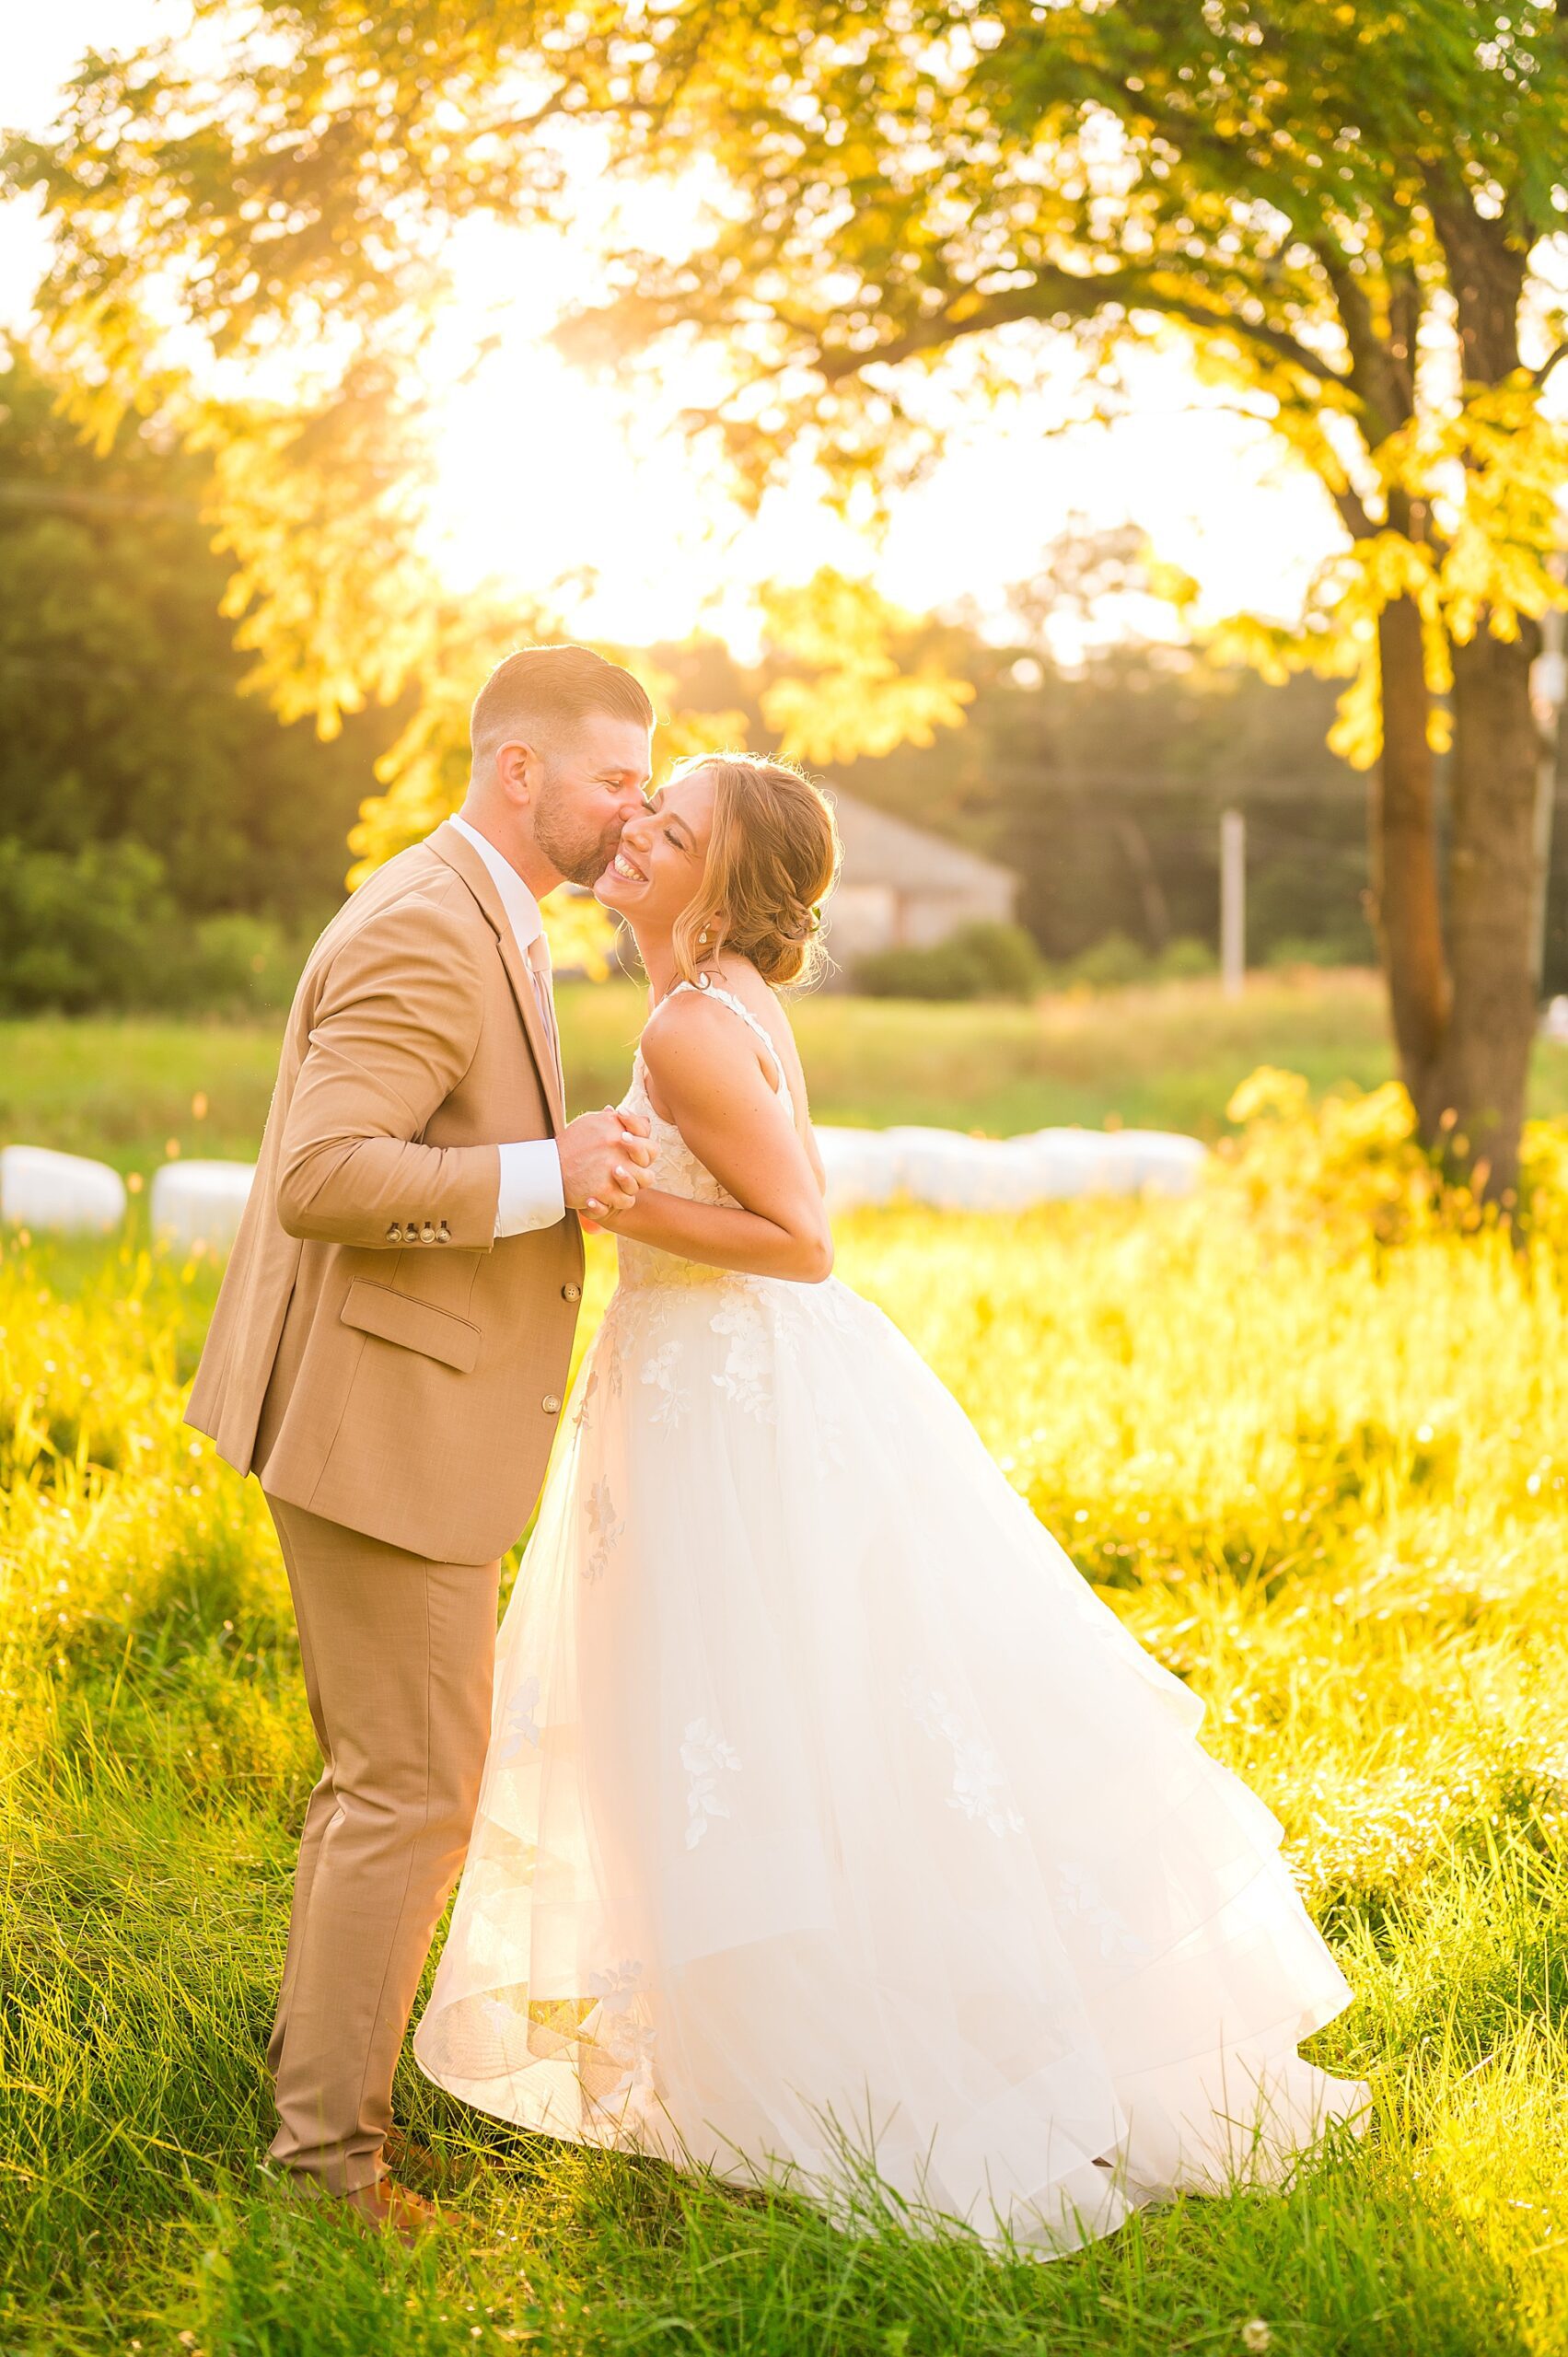 newlyweds kiss in the glow of the summer sun